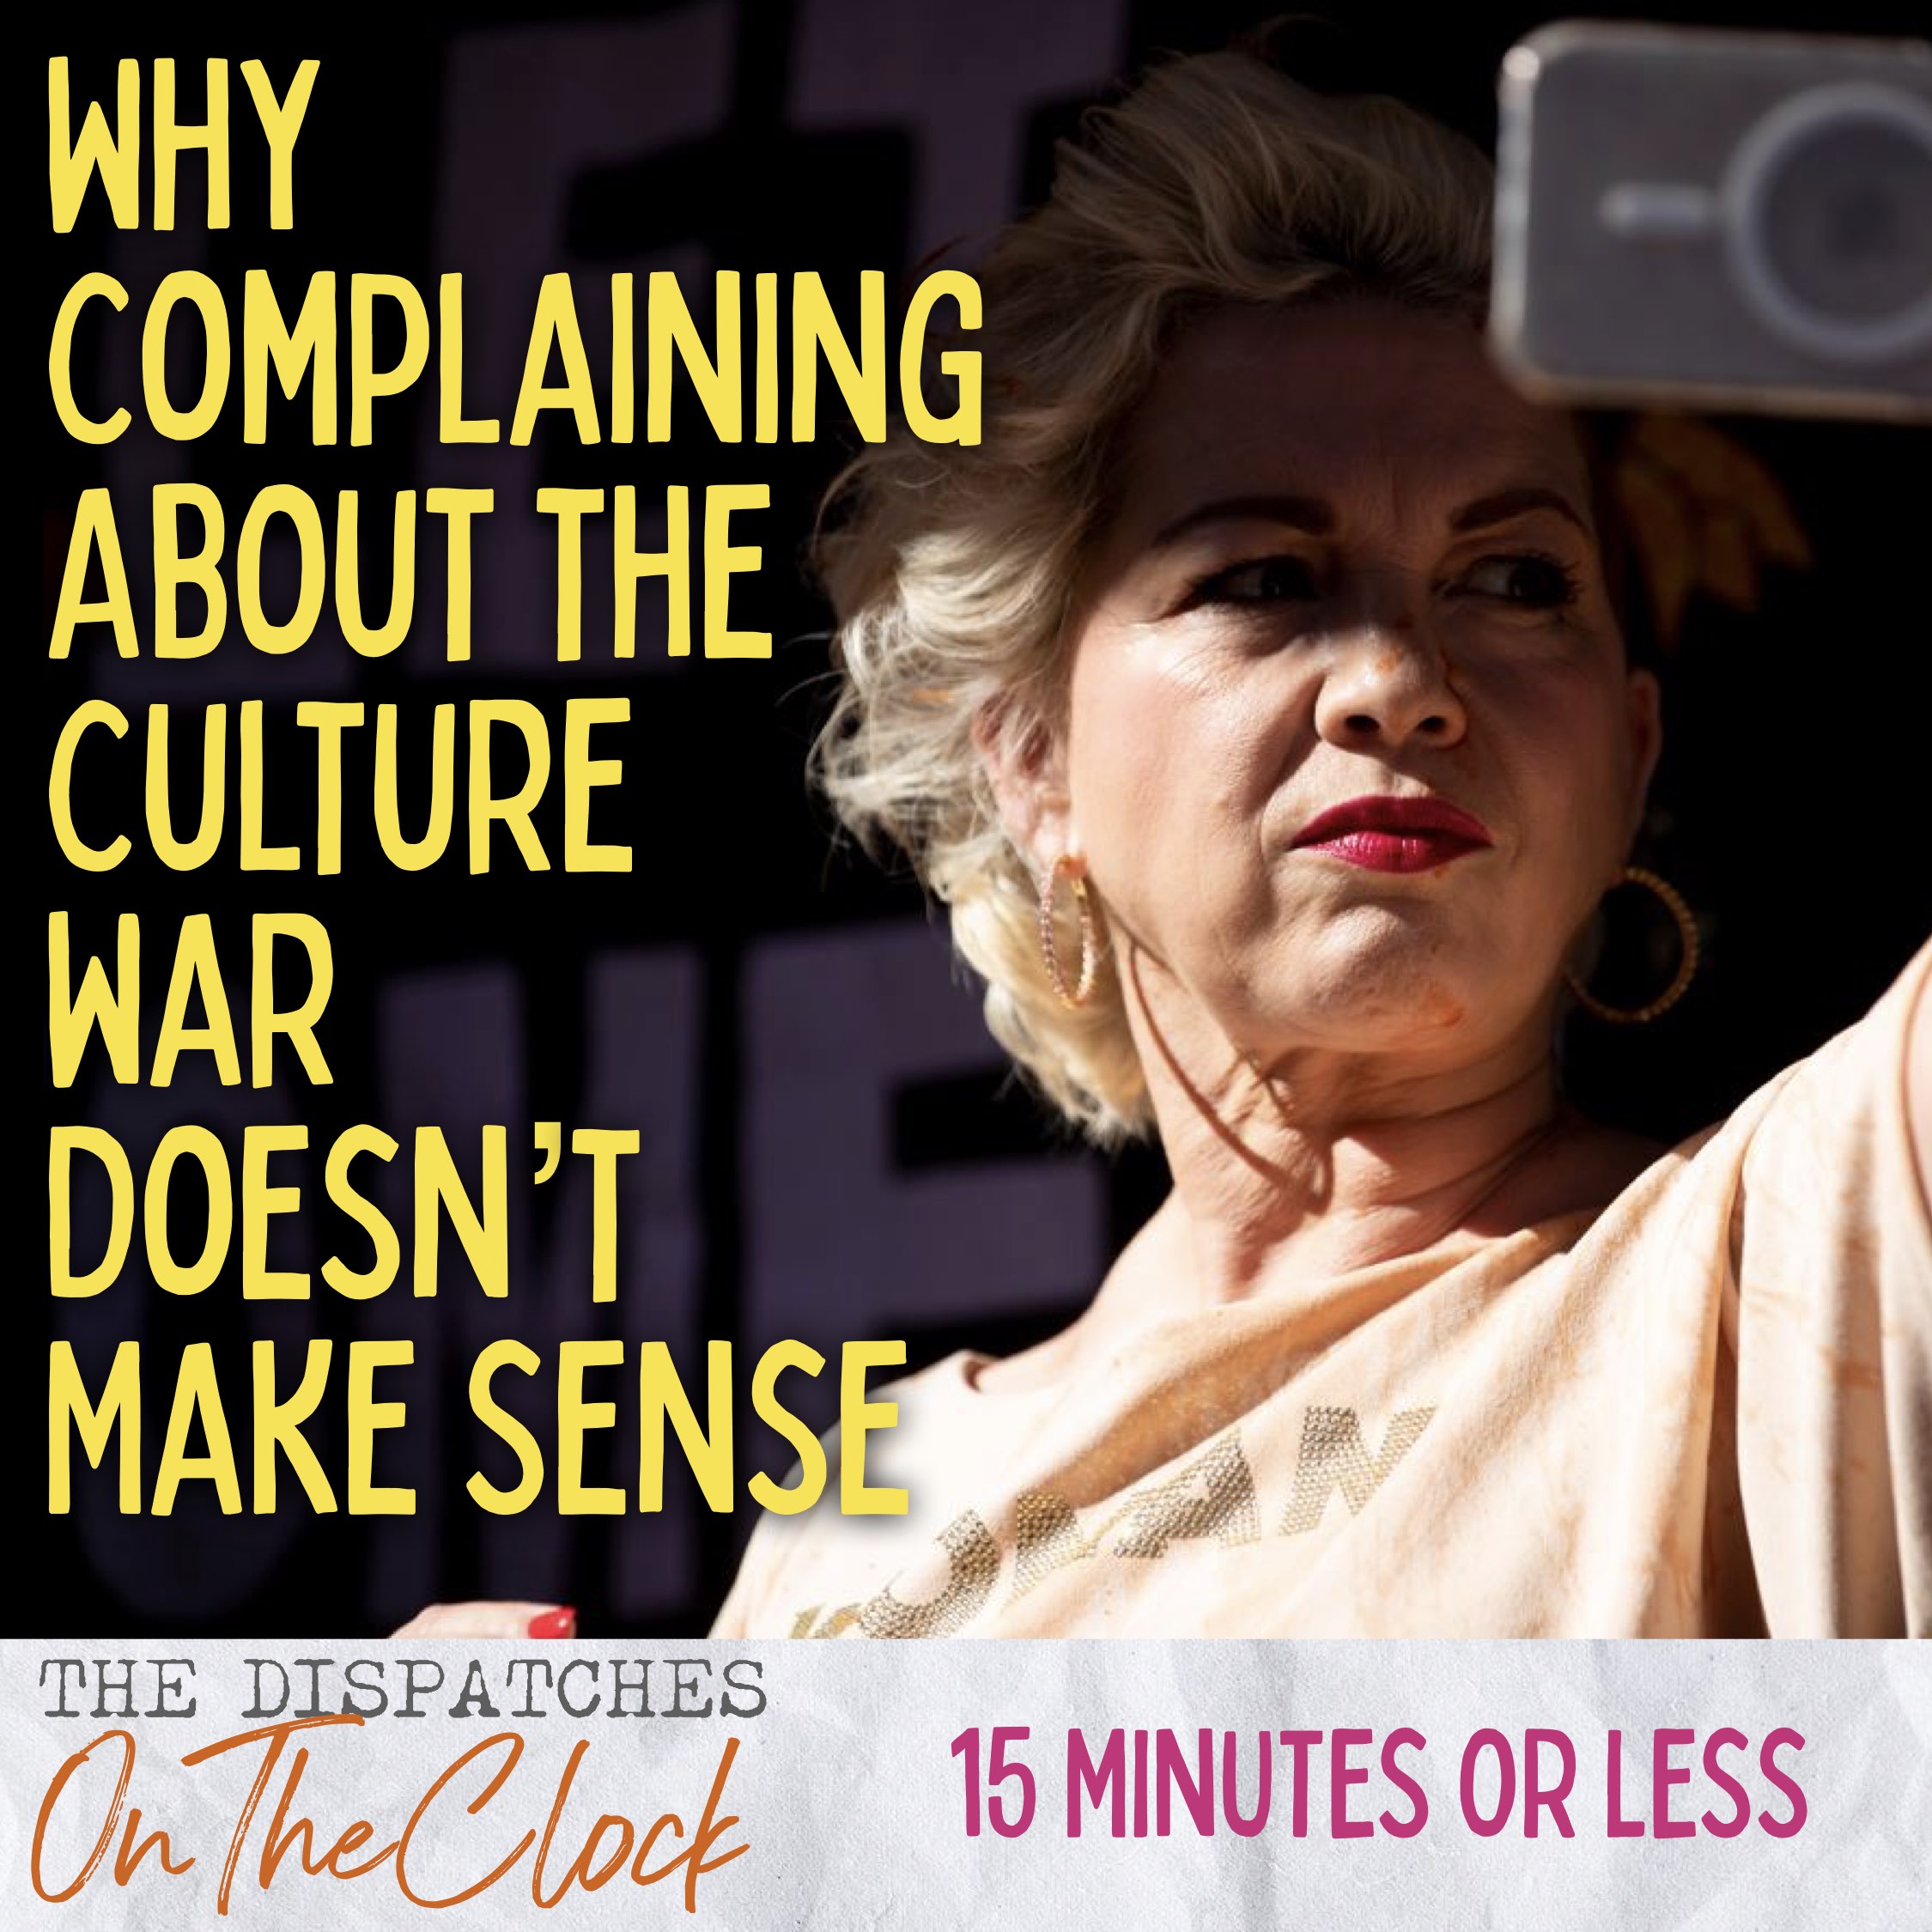 ON THE CLOCK | Why Complaining About The Culture War Doesn’t Make Sense